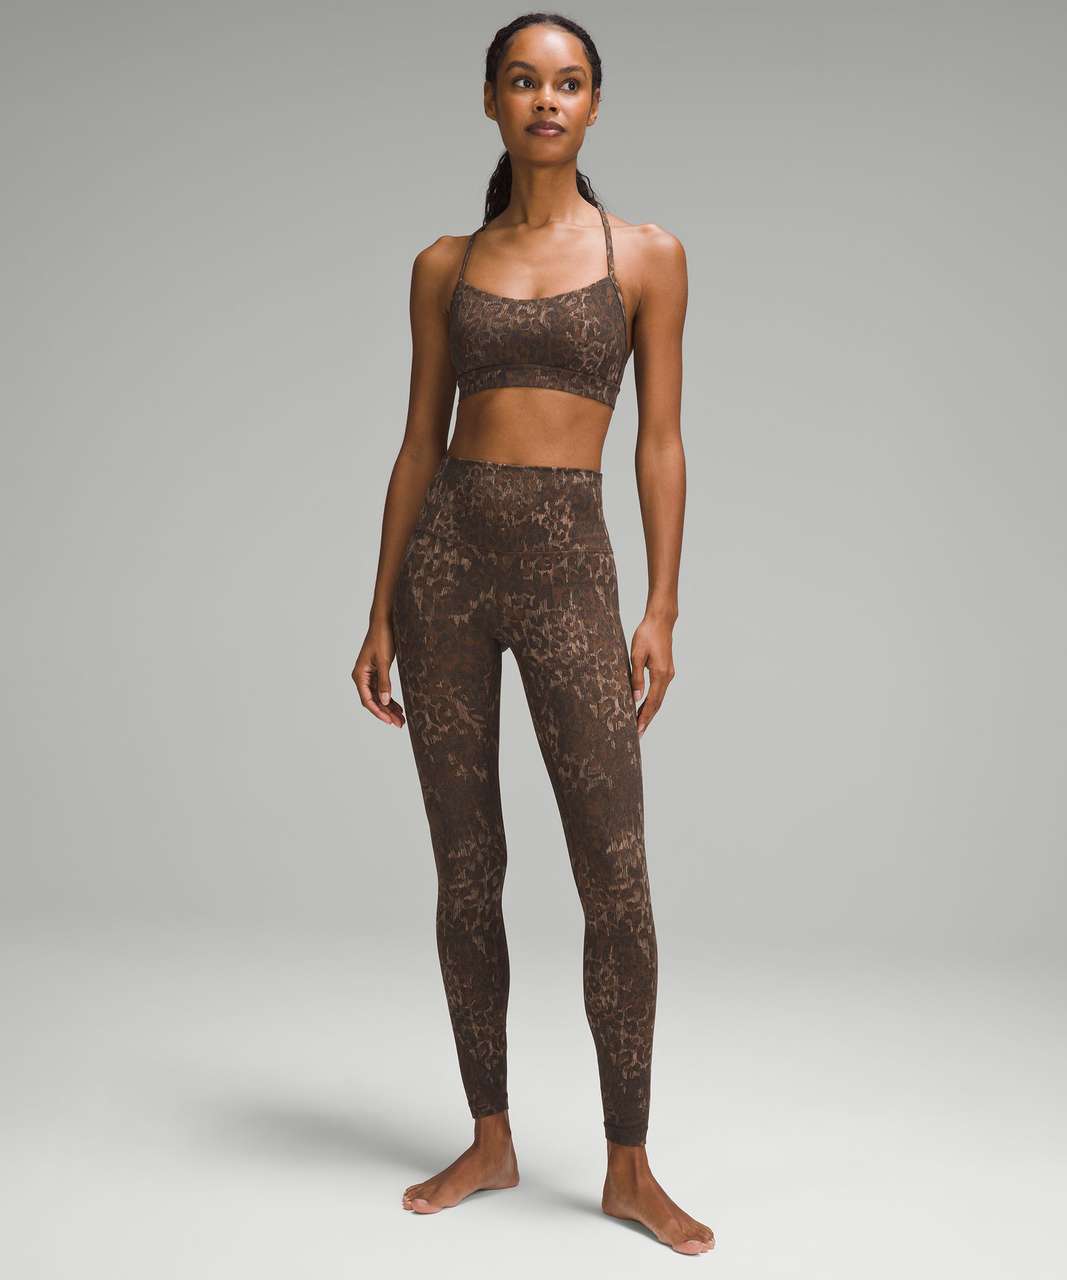 Lululemon Align High-Rise Pant 28" - Lined Truleopard MAX Brown Multi